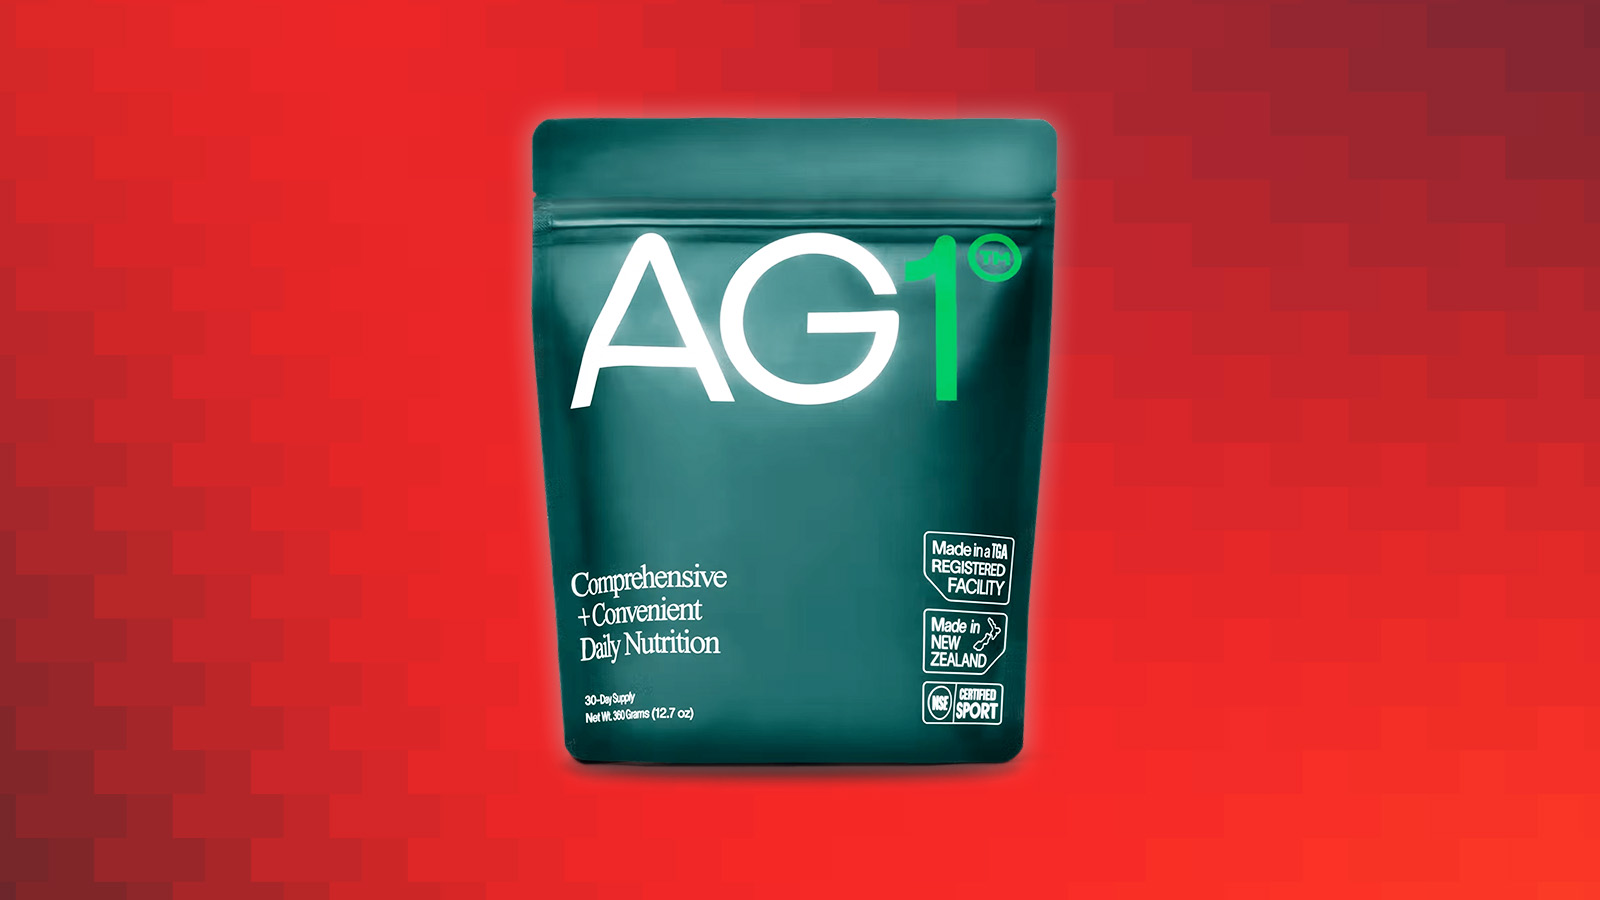 Athletic Greens Review - Is it Worth It? (AG1 Review) 